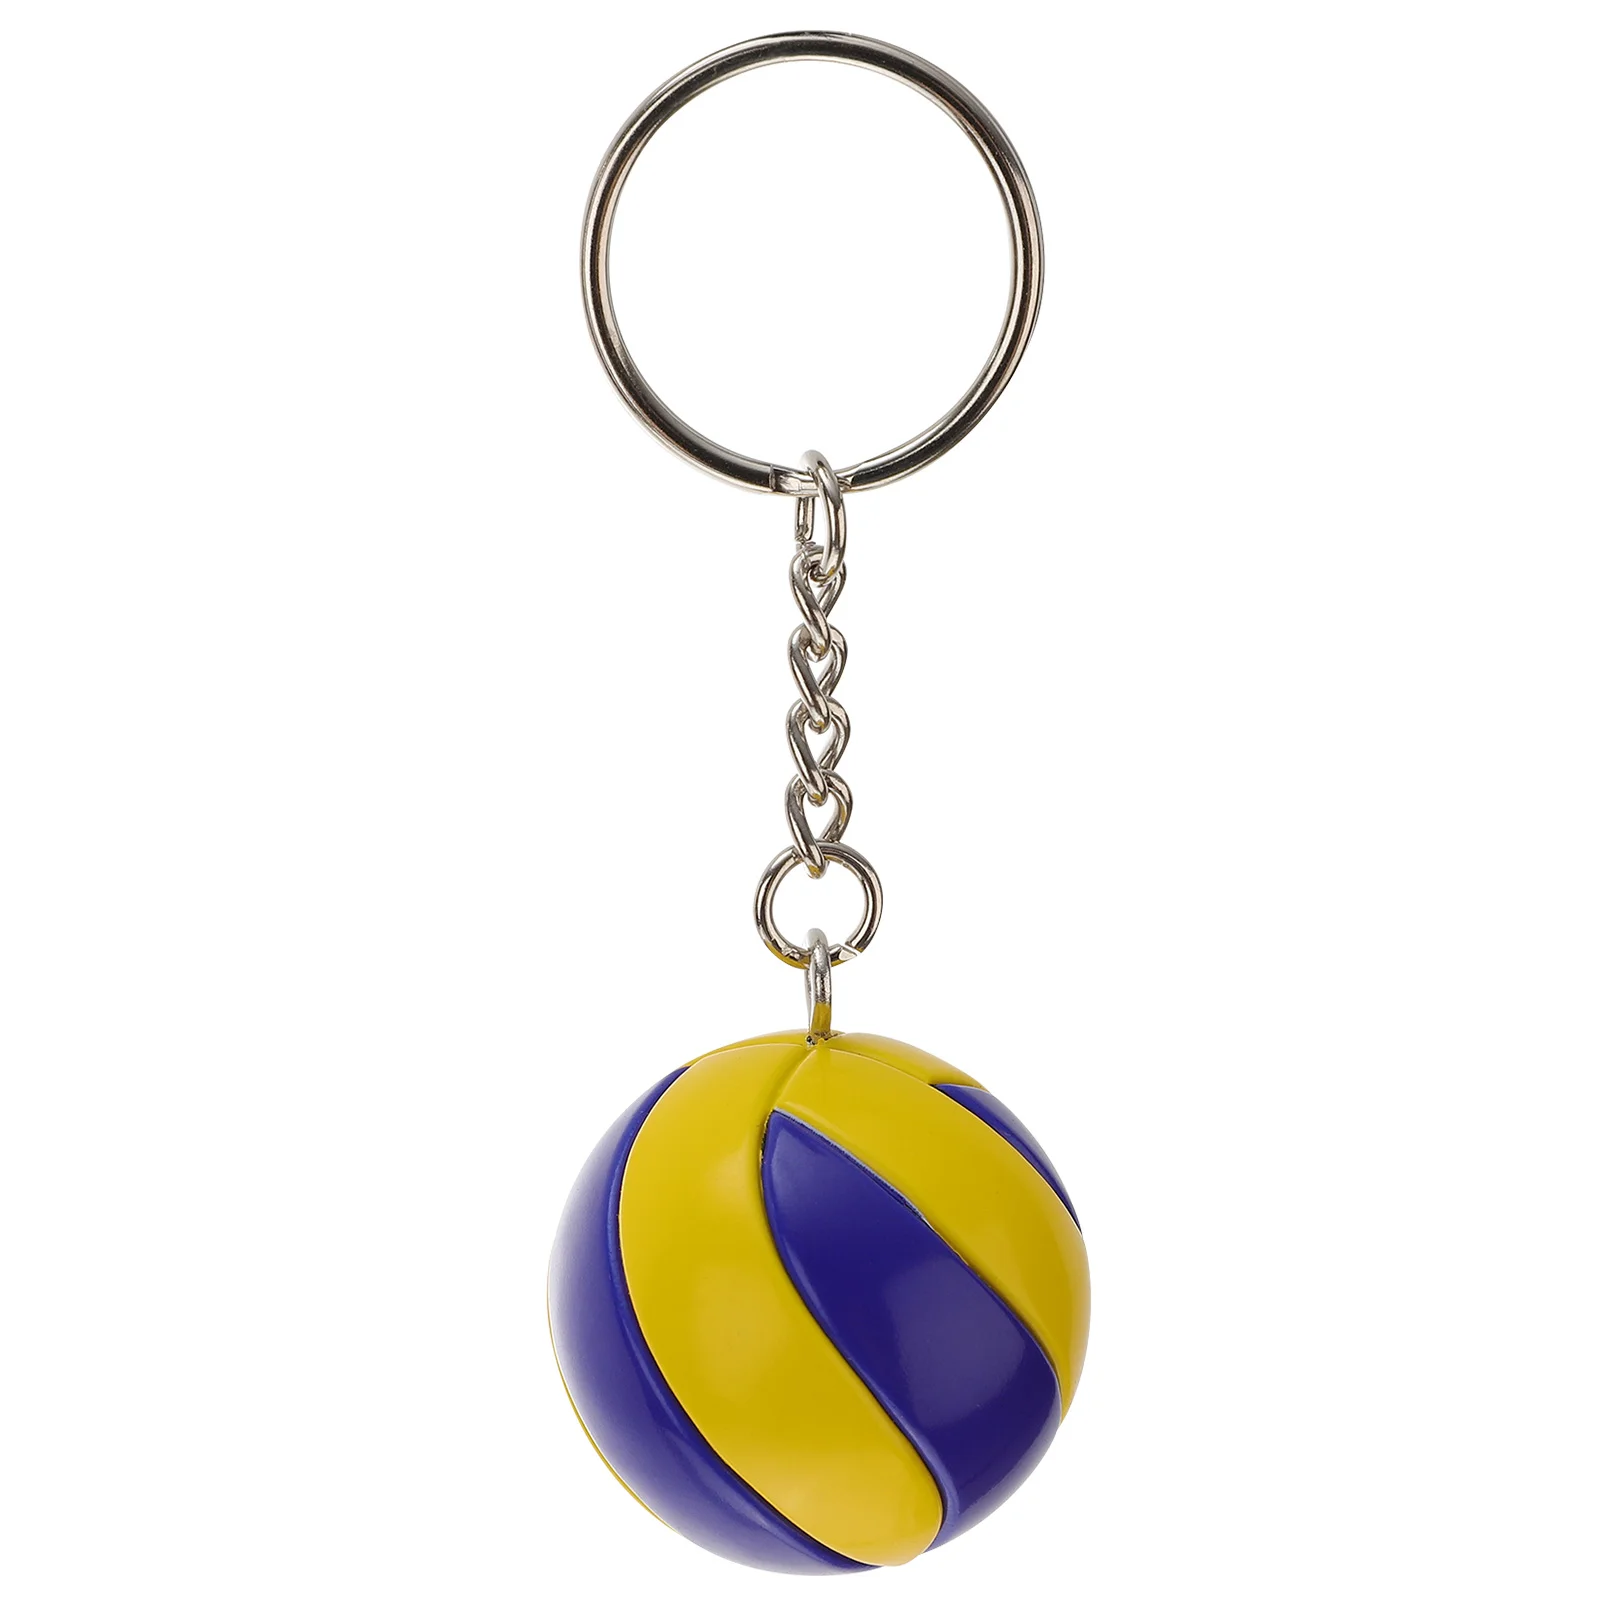 

Volleyball Keychain Sports Charm Keyring Ornament Volleyball Gifts Sports Souvenir Favors Team Giveaways School Carnival Prizes